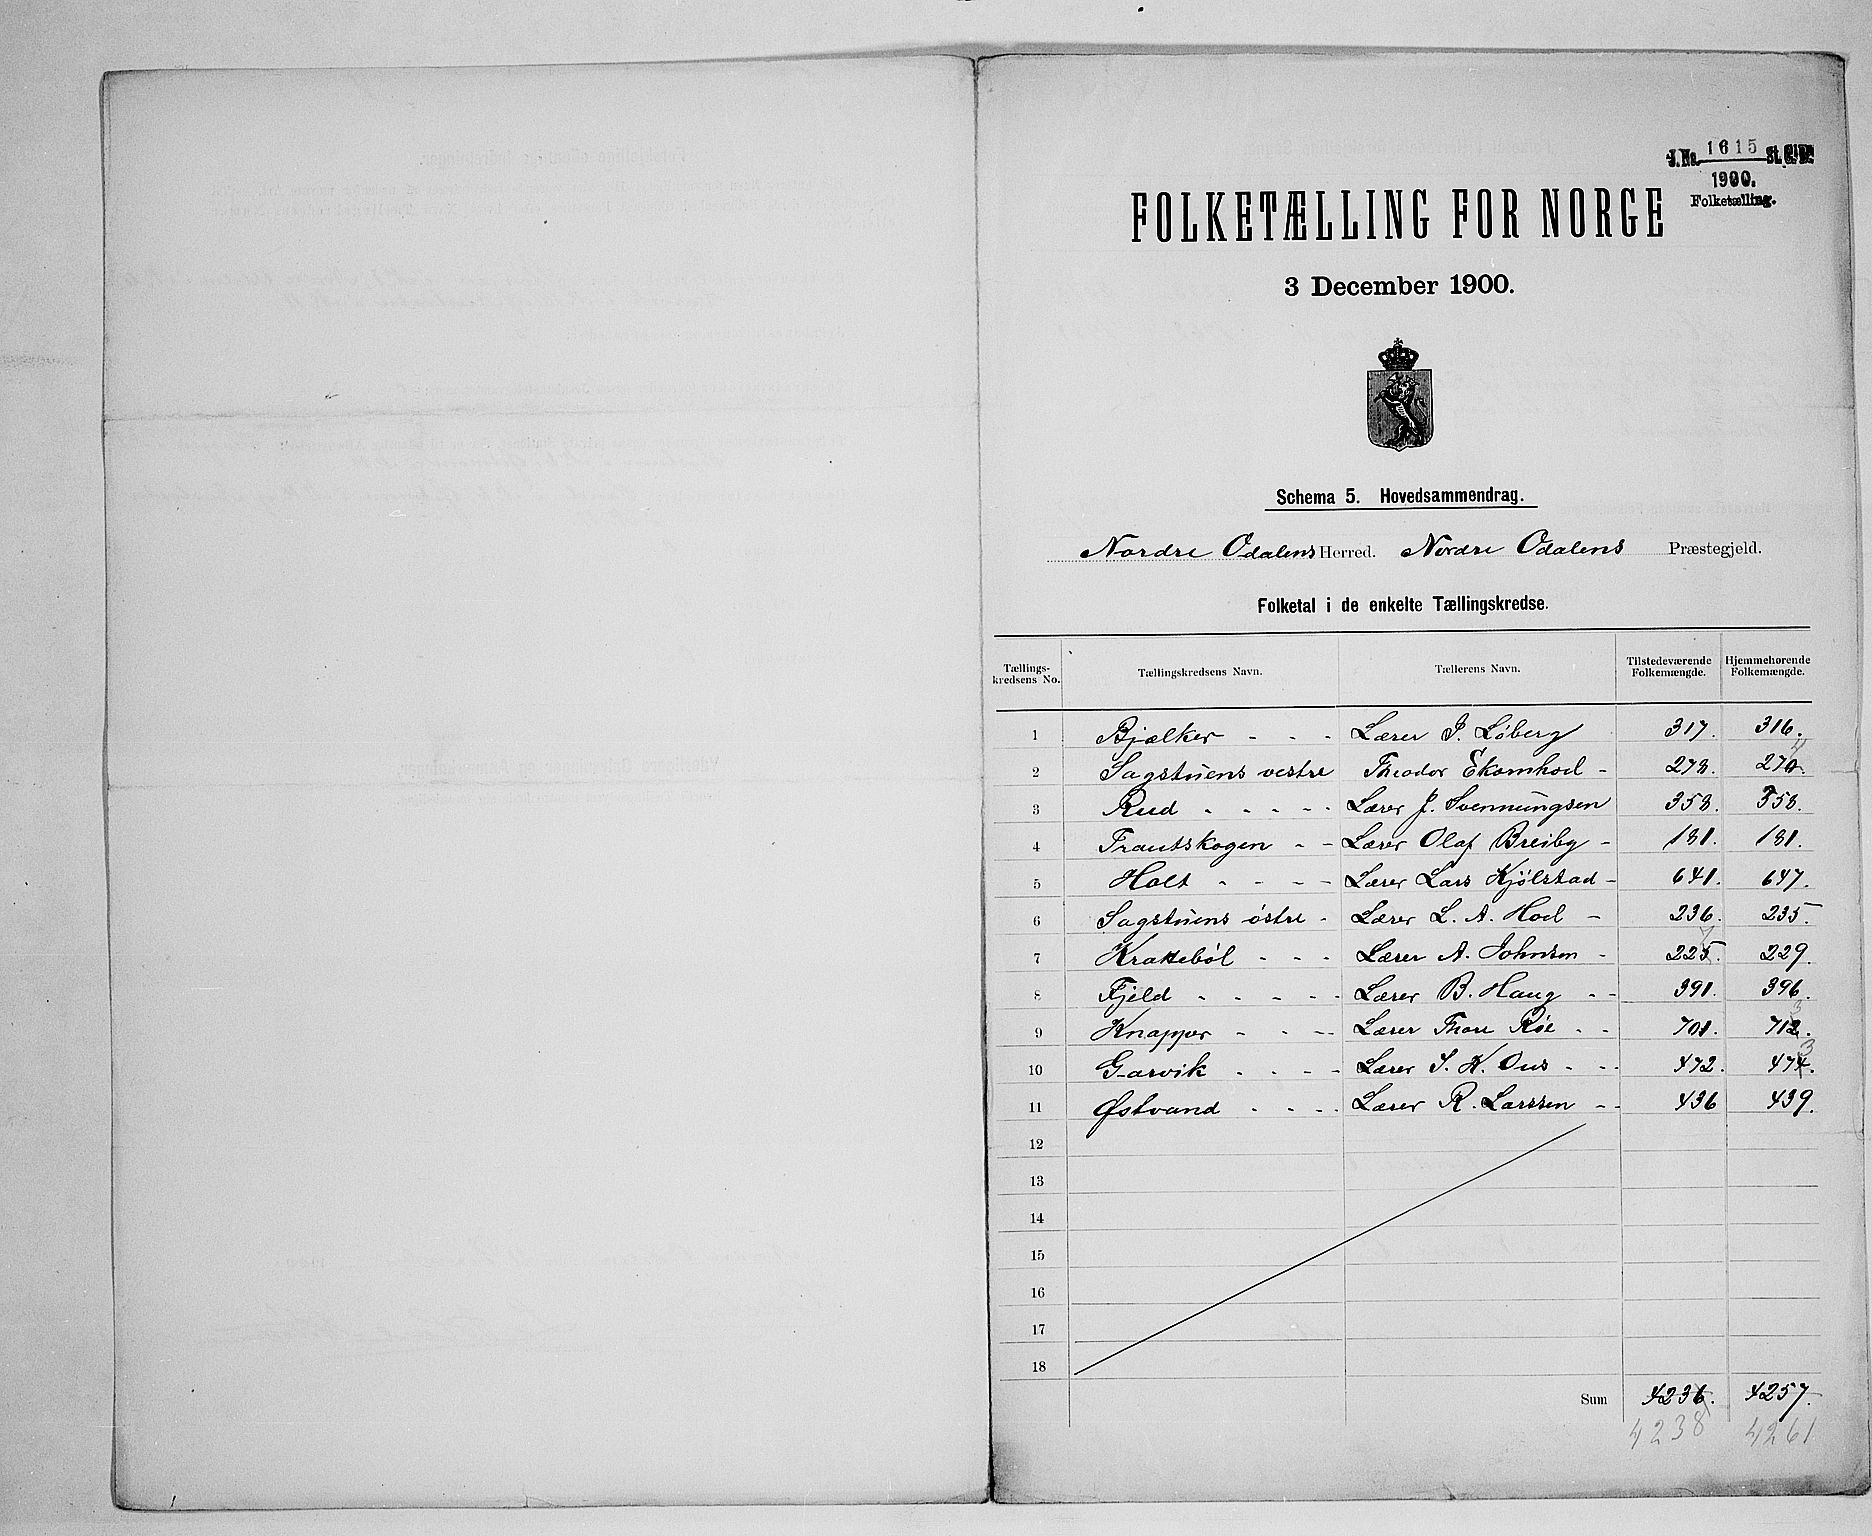 SAH, 1900 census for Nord-Odal, 1900, p. 2